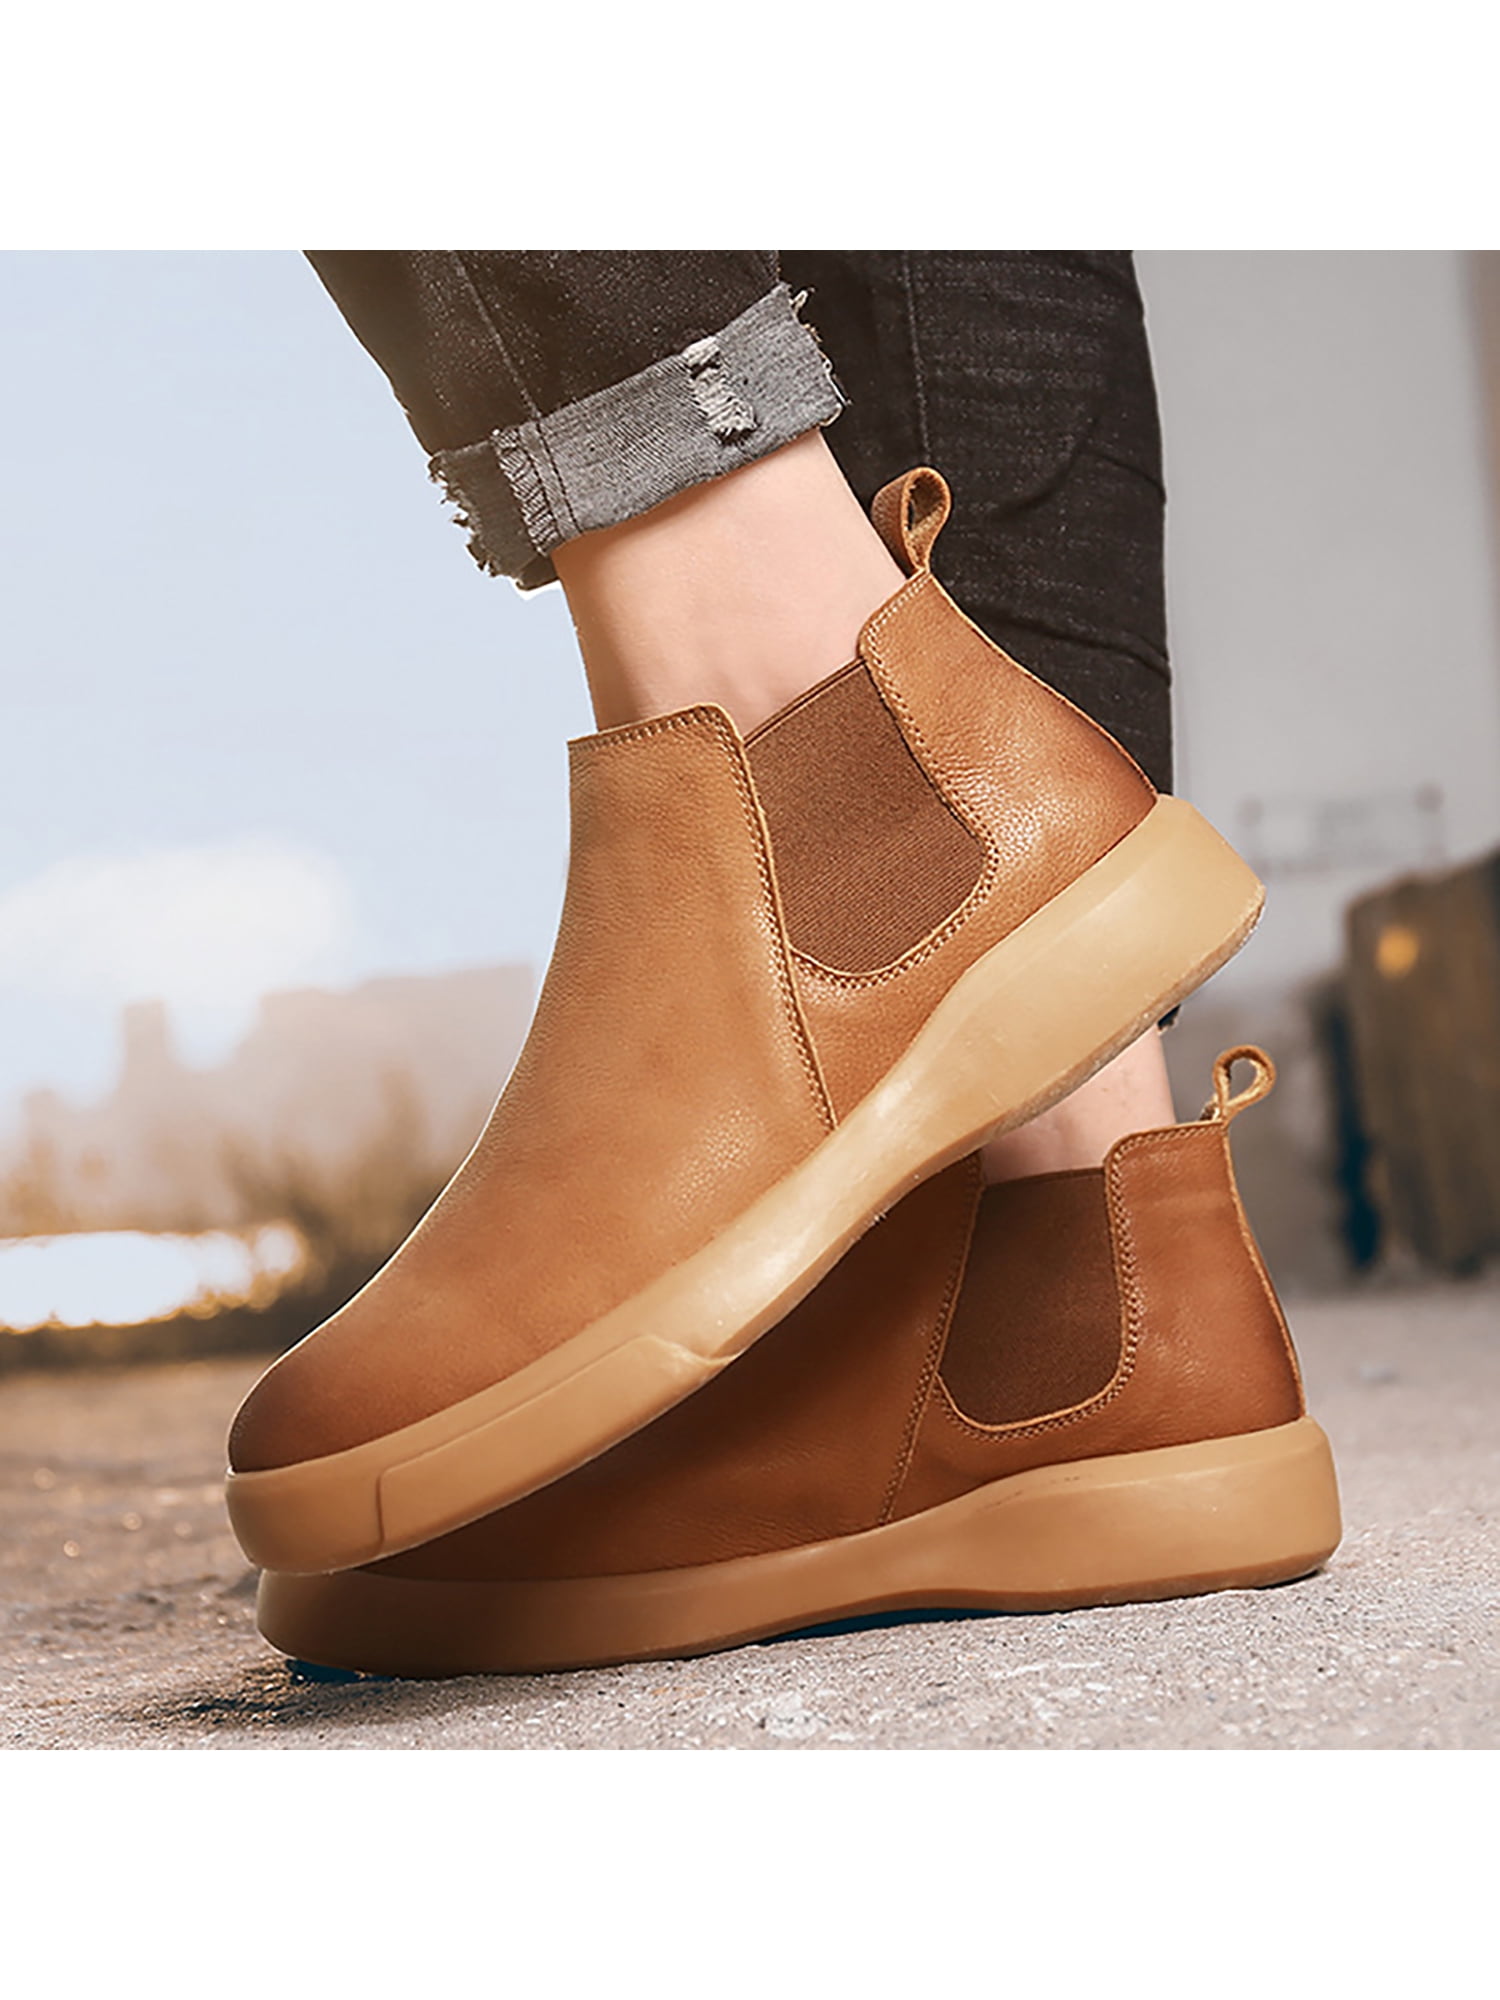 Men's Chelsea Boots Slip-on PU Boots Casual Oxford Dress Ankle Bootie US 7-13 Walmart.com